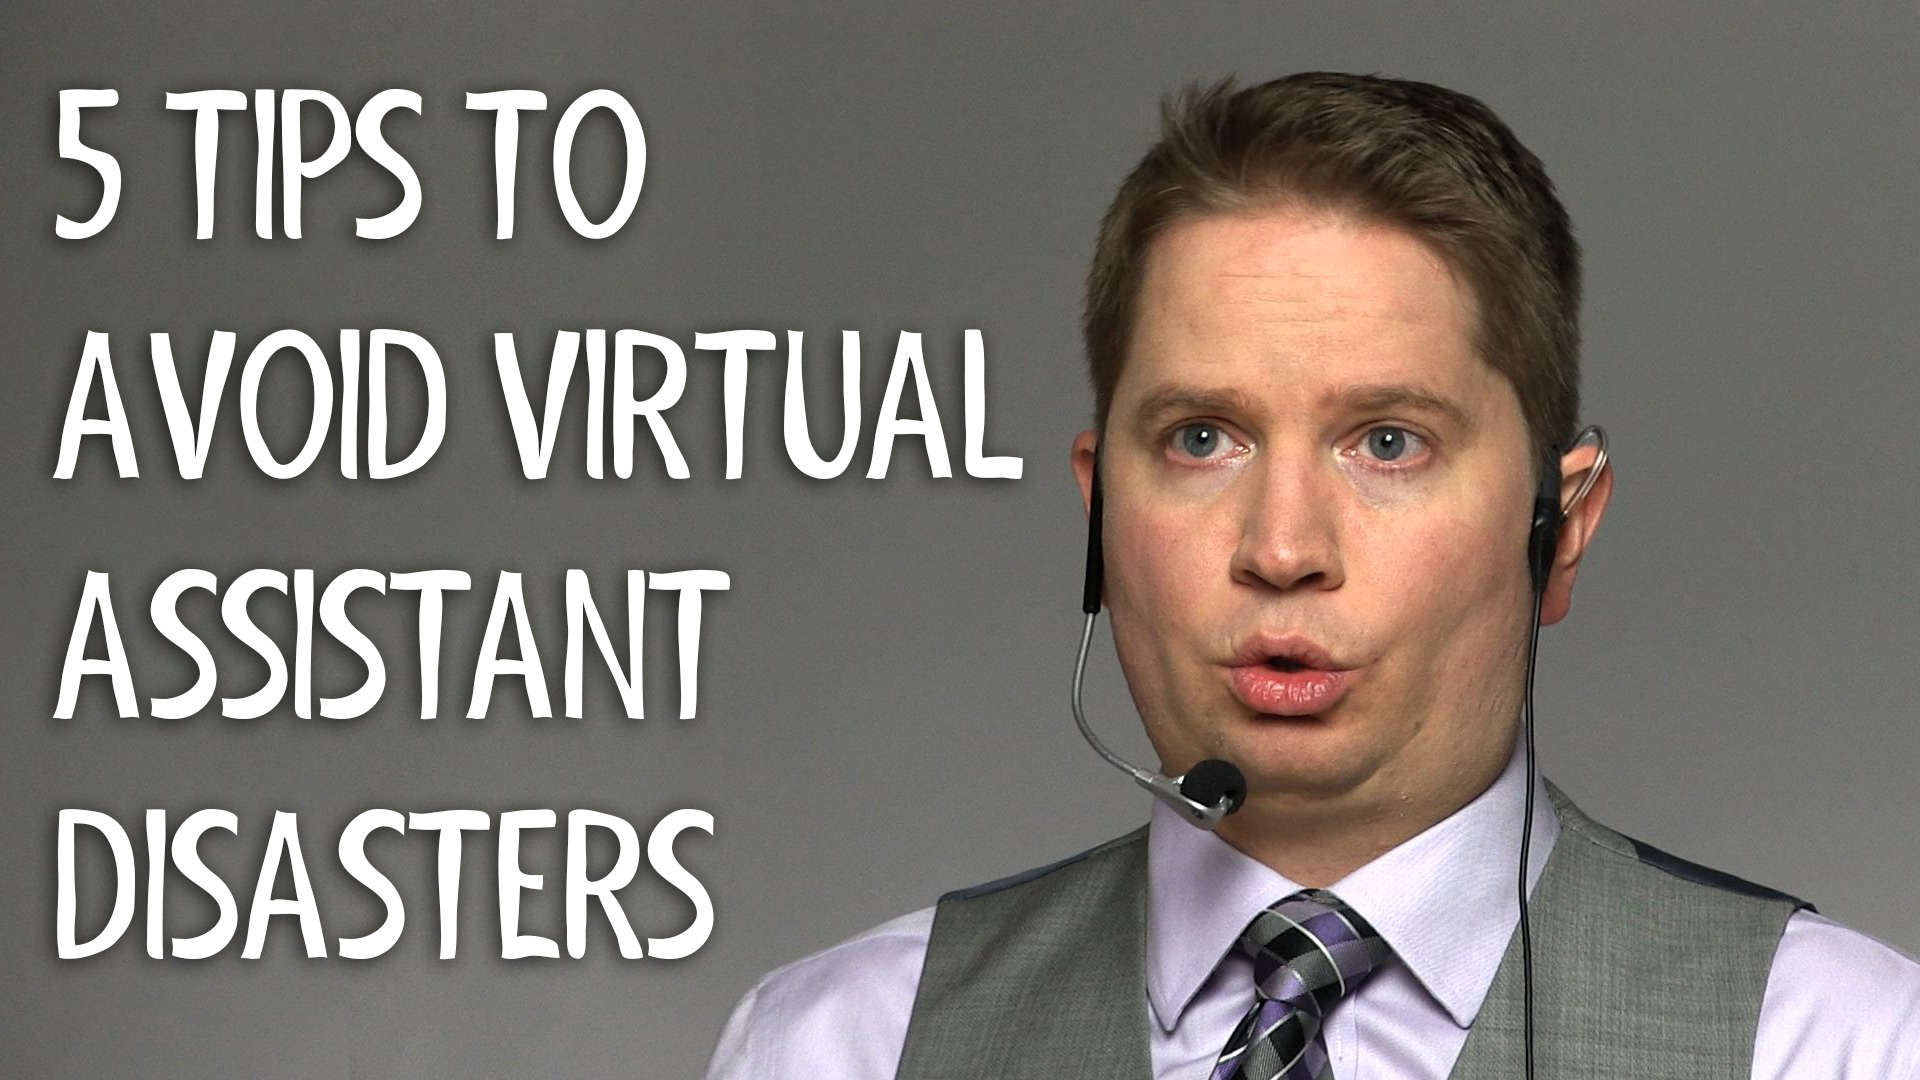 5 Tips to Avoid Virtual Assistant Disasters